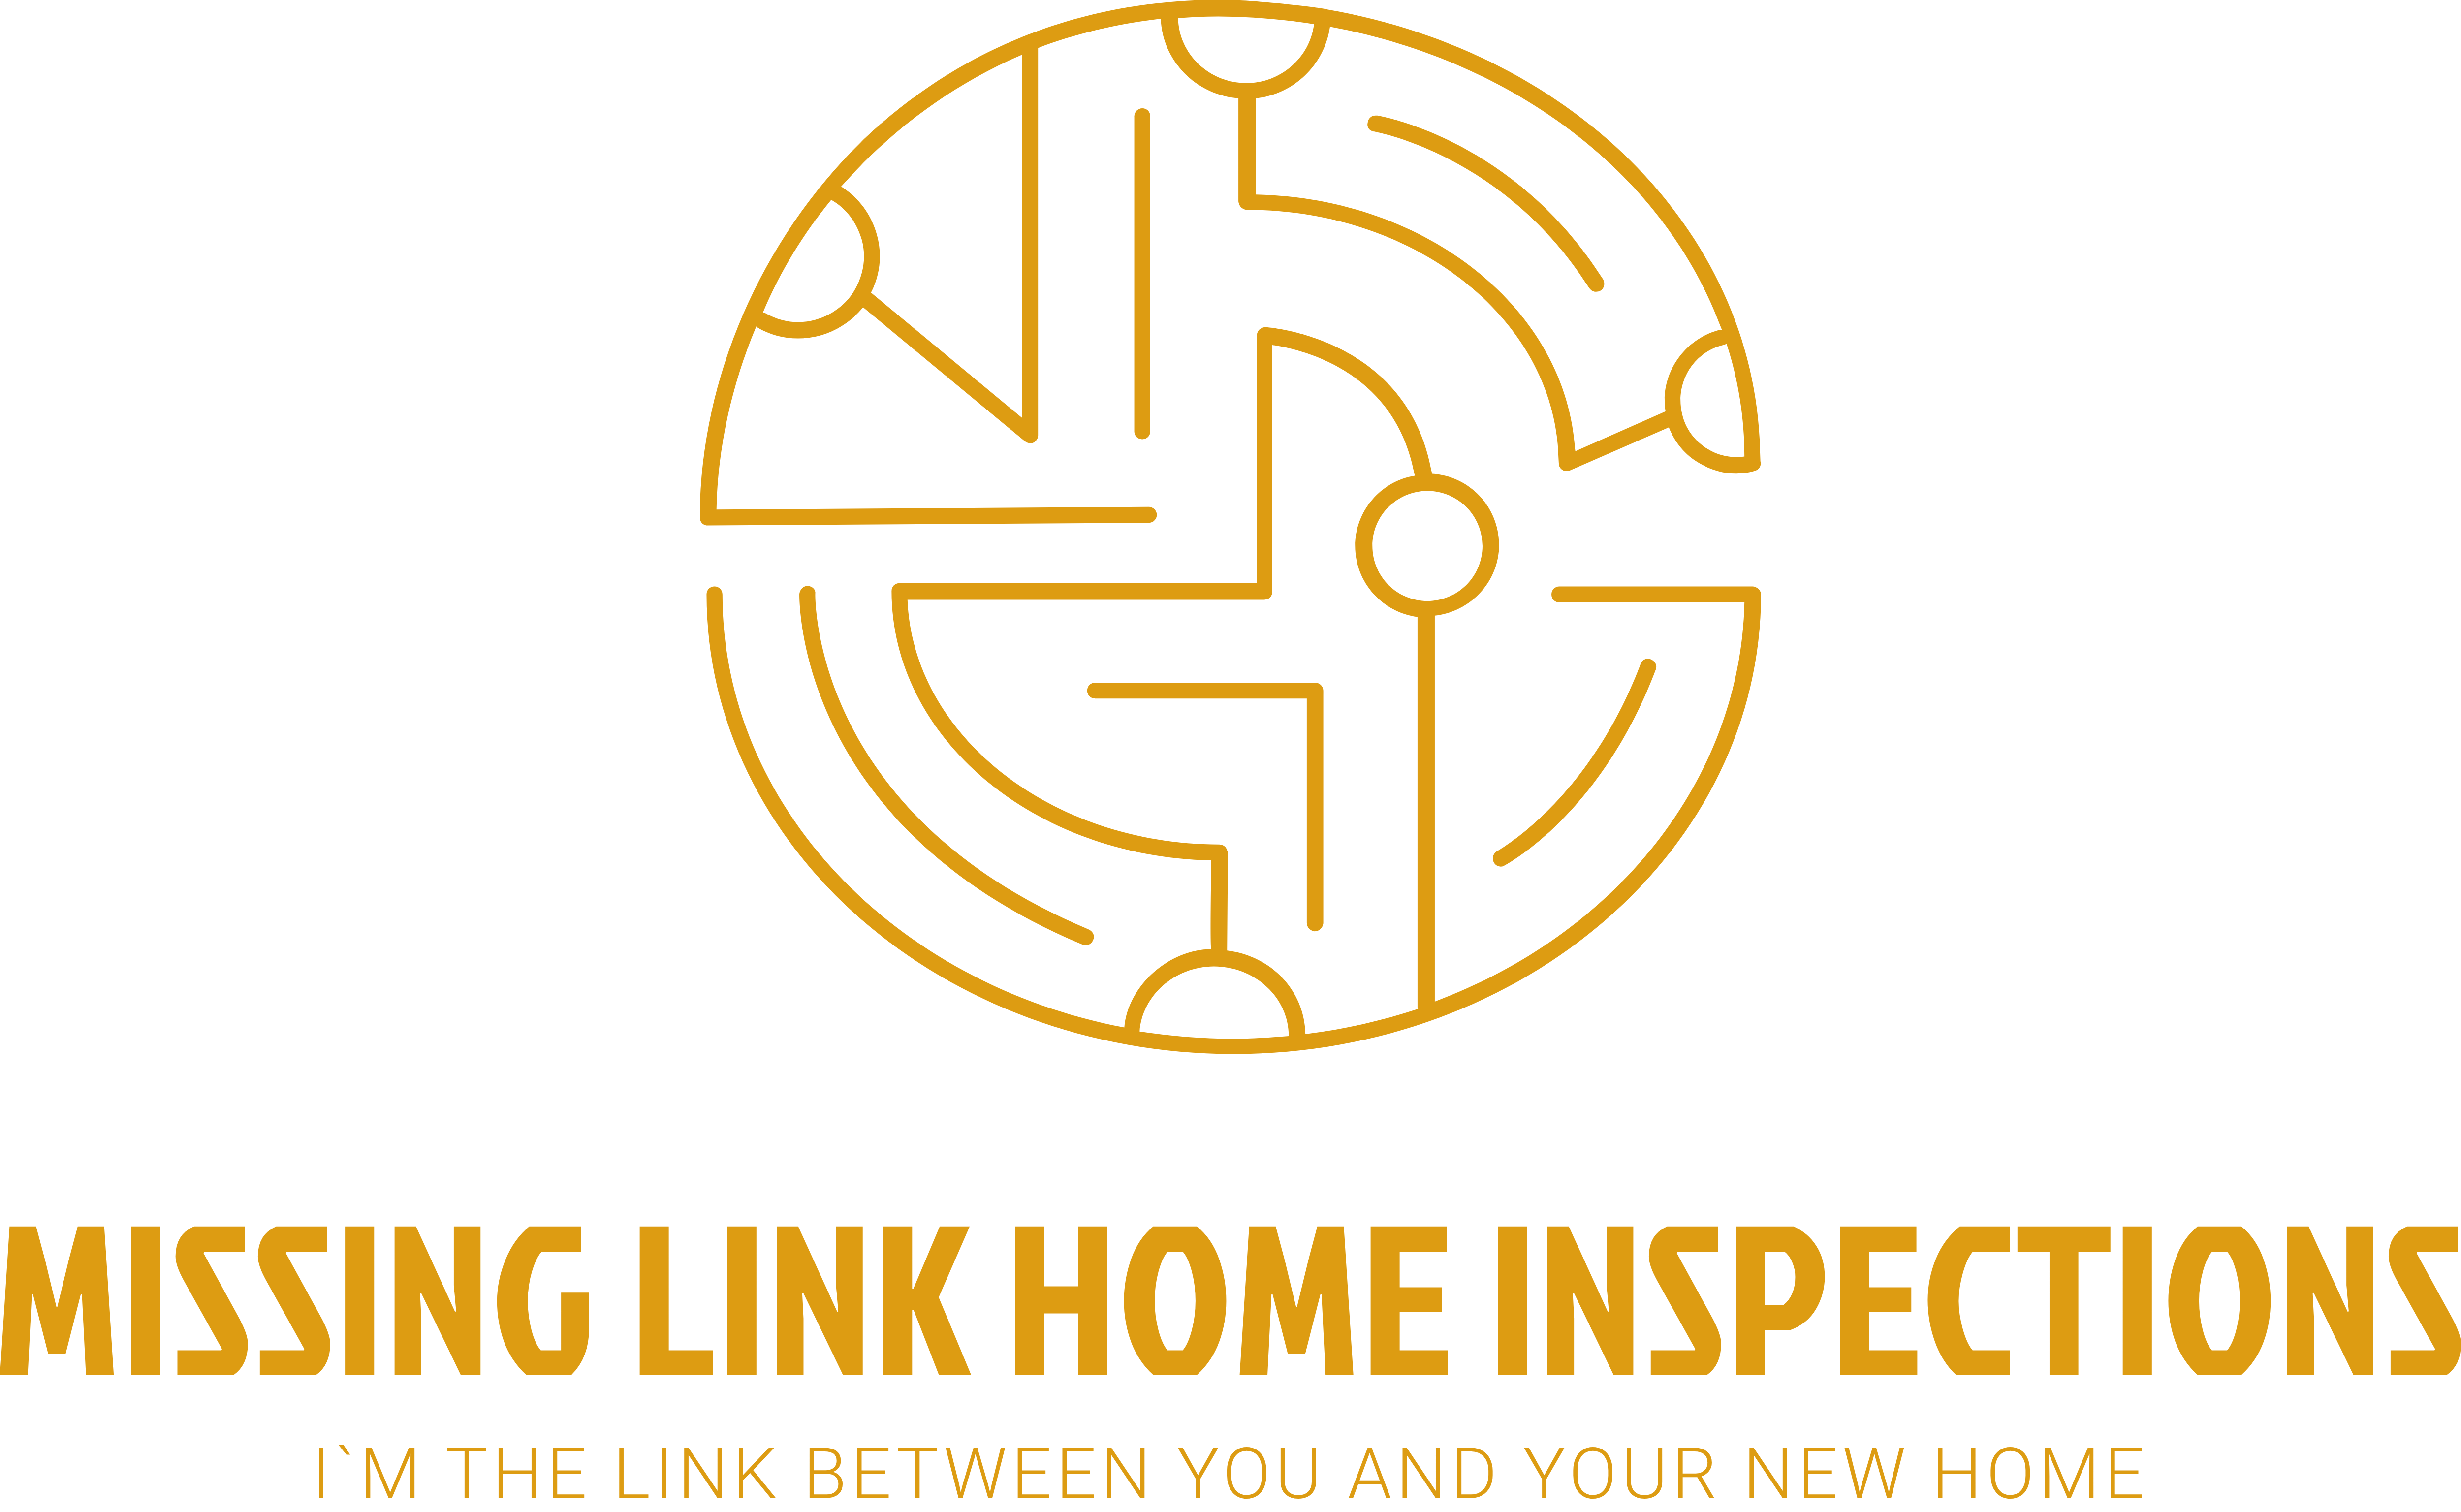 Missing Link Home Inspections